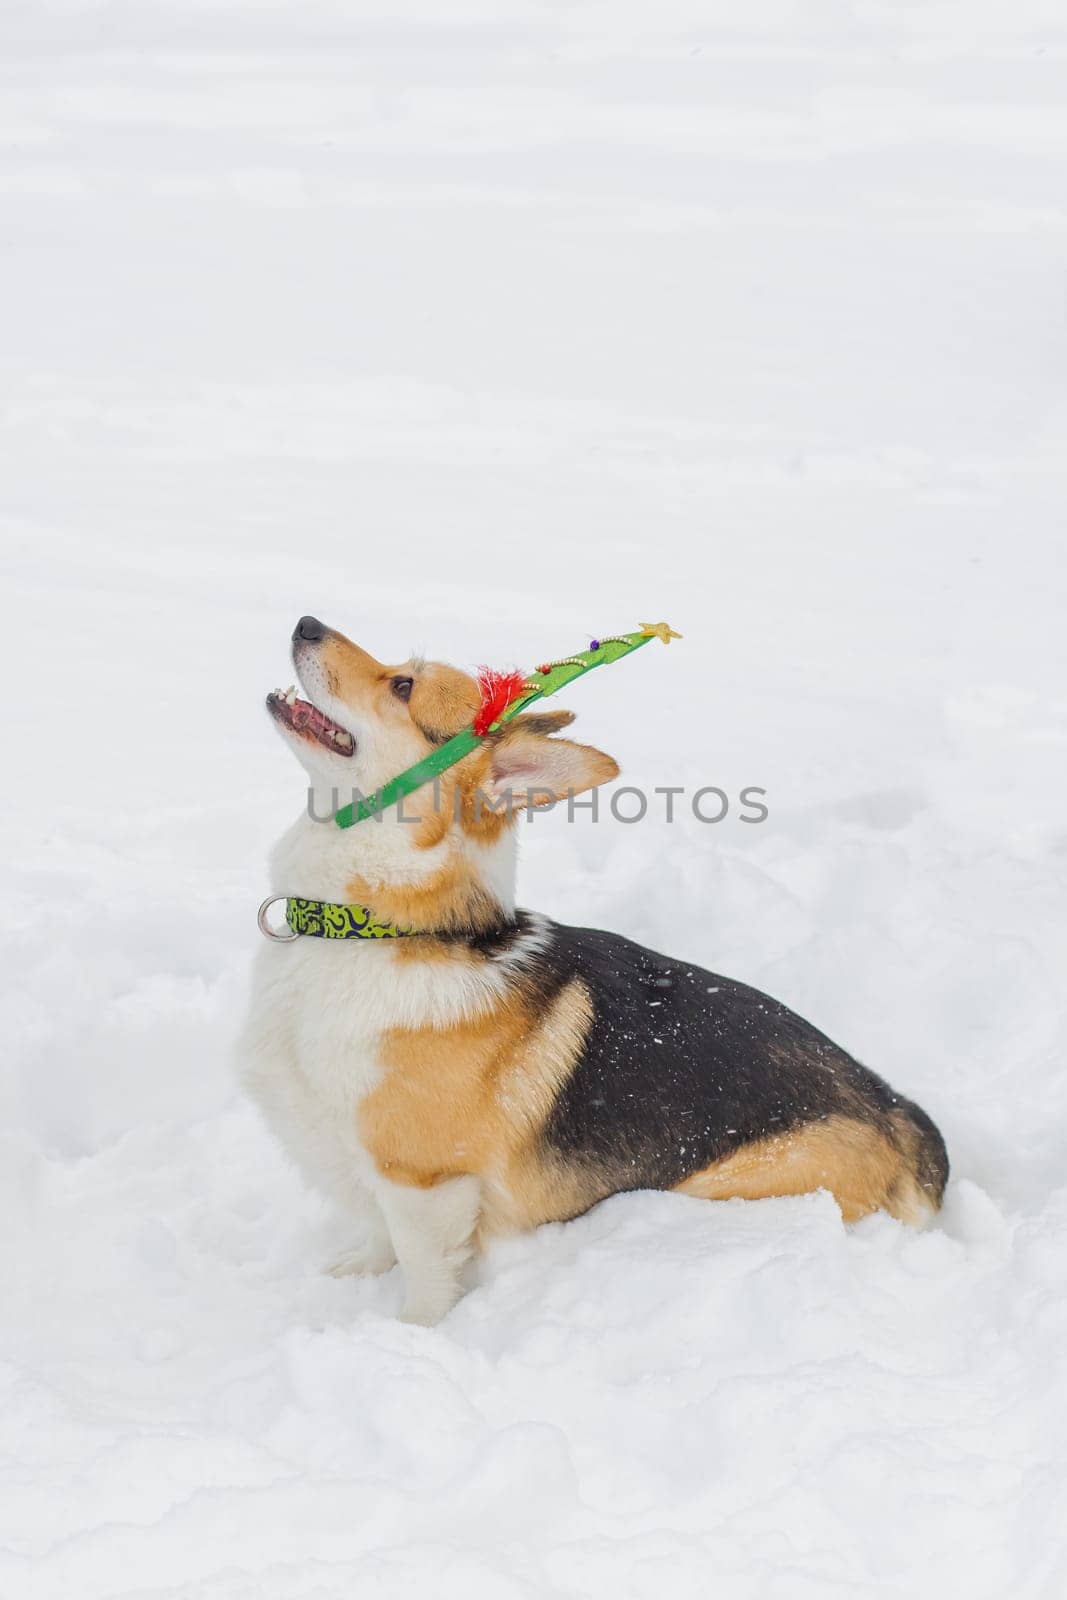 Welsh Corgi Pembroke puppy peeking out from behind snow-covered tree trunks against the backdrop of a frosty winter landscape. Muzzle in the snow